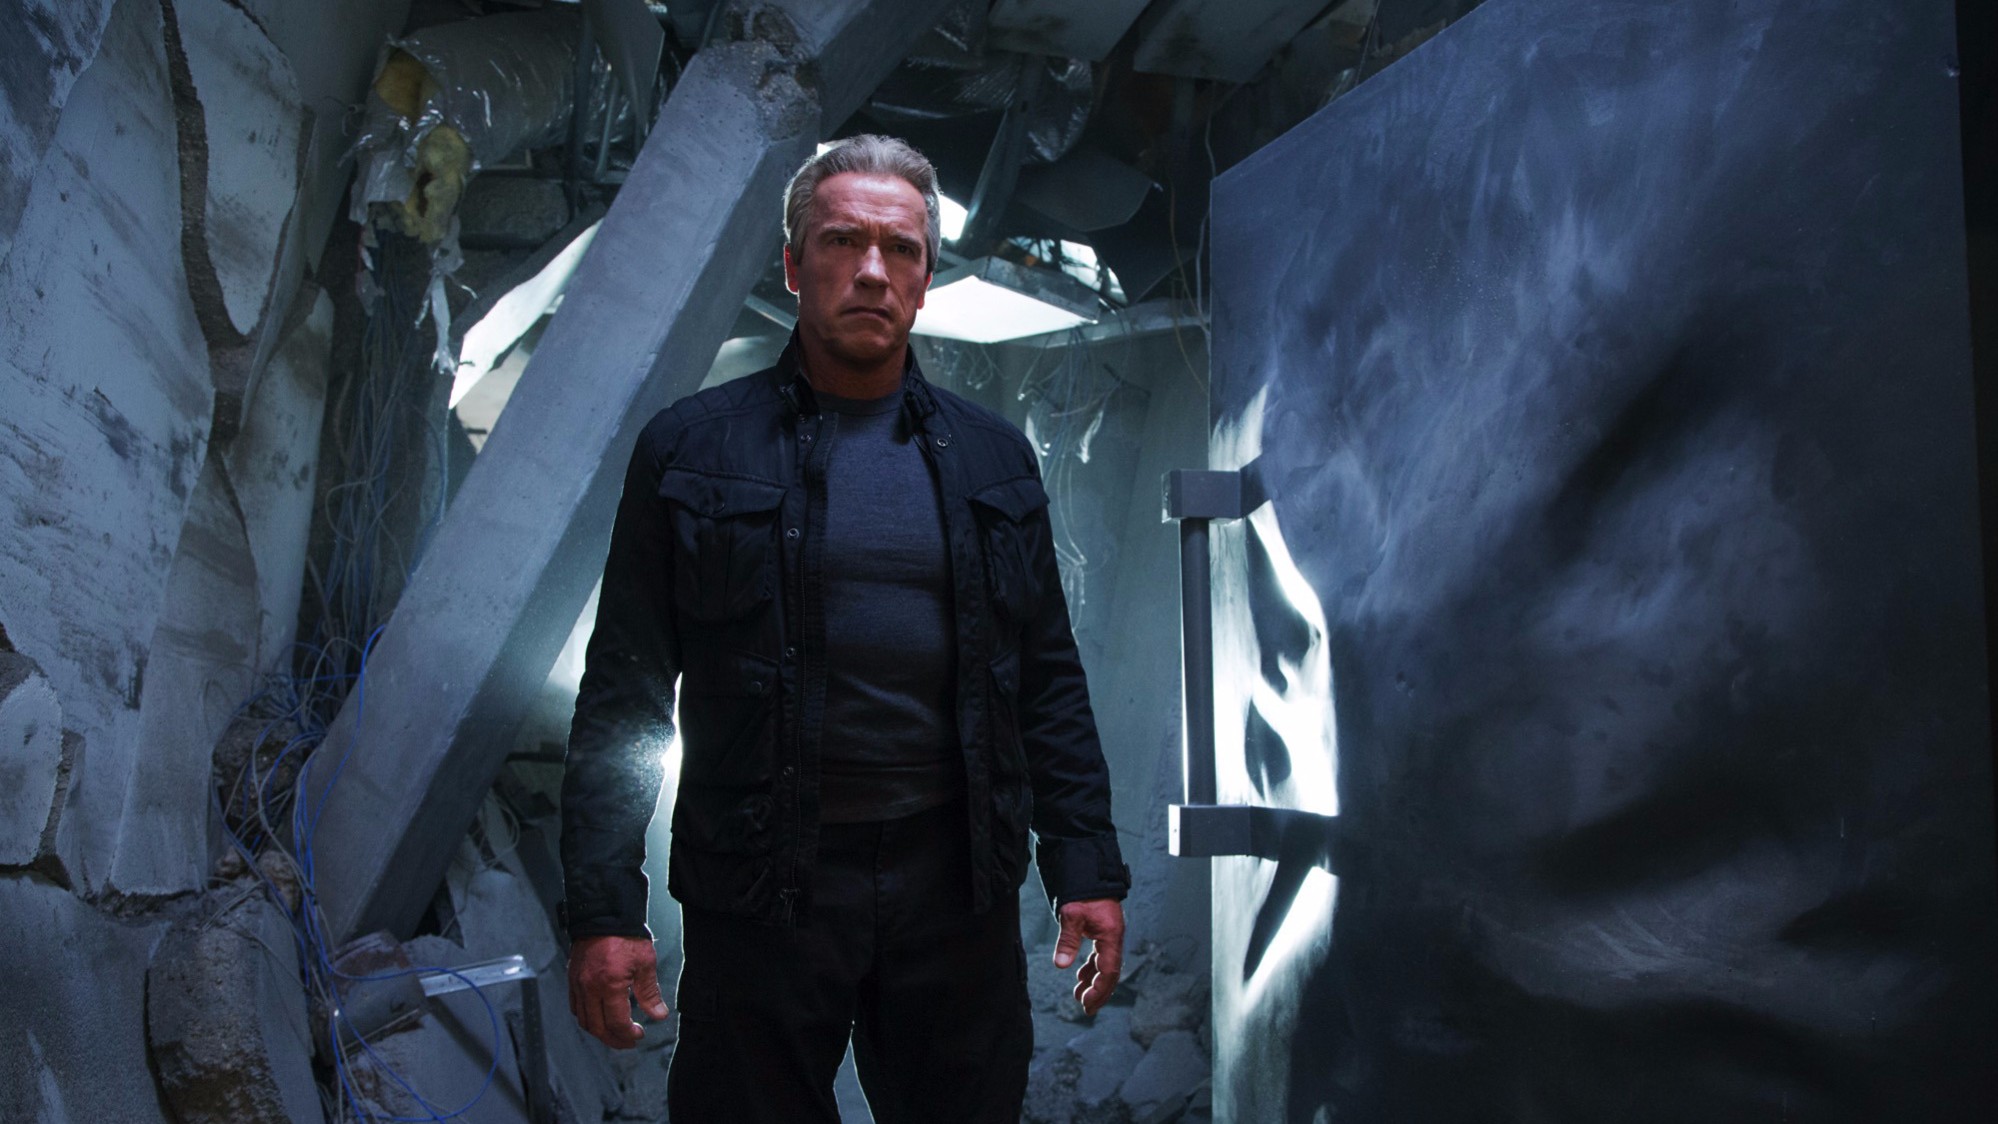 ‘TERMINATOR GENISYS’ NEEDS YOUR CLOTHES, YOUR BOOTS, AND EVERY OUNCE OF YOUR PATIENCE